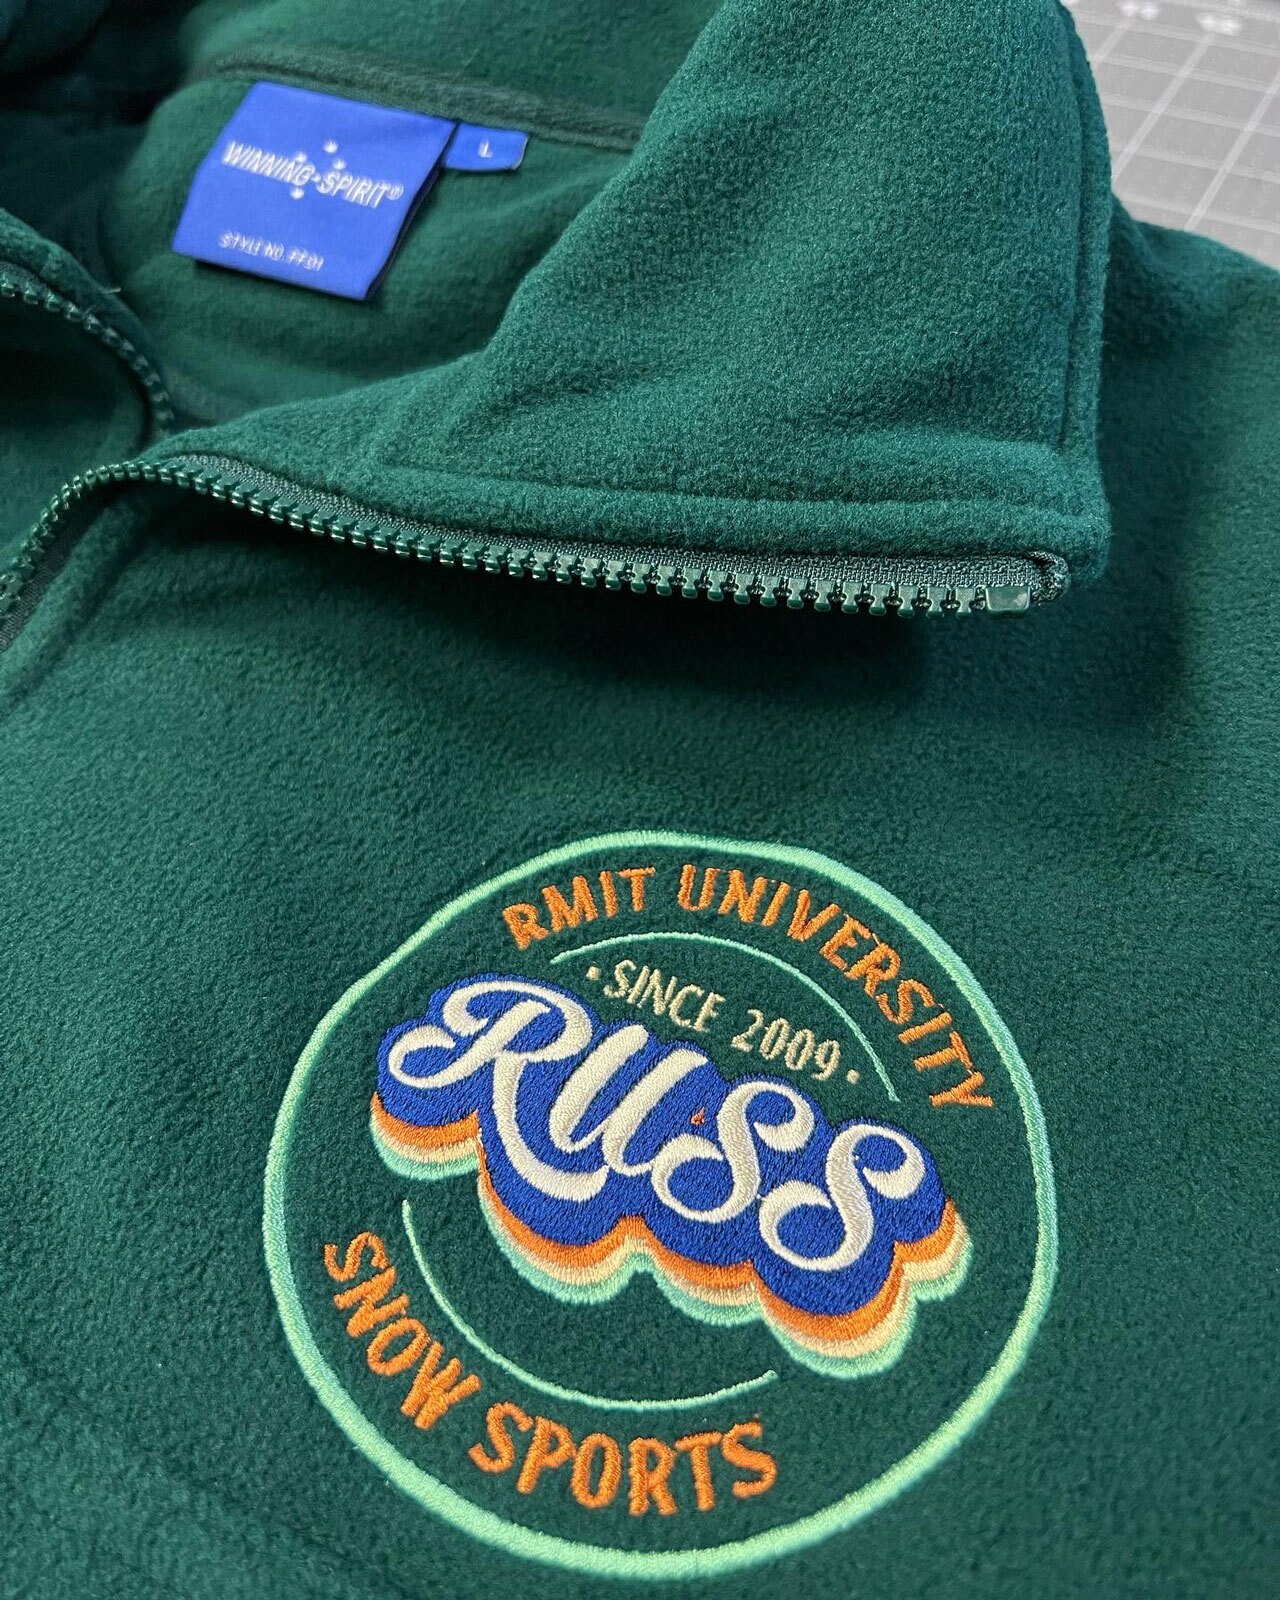 RUSS logo embroidery on jacket